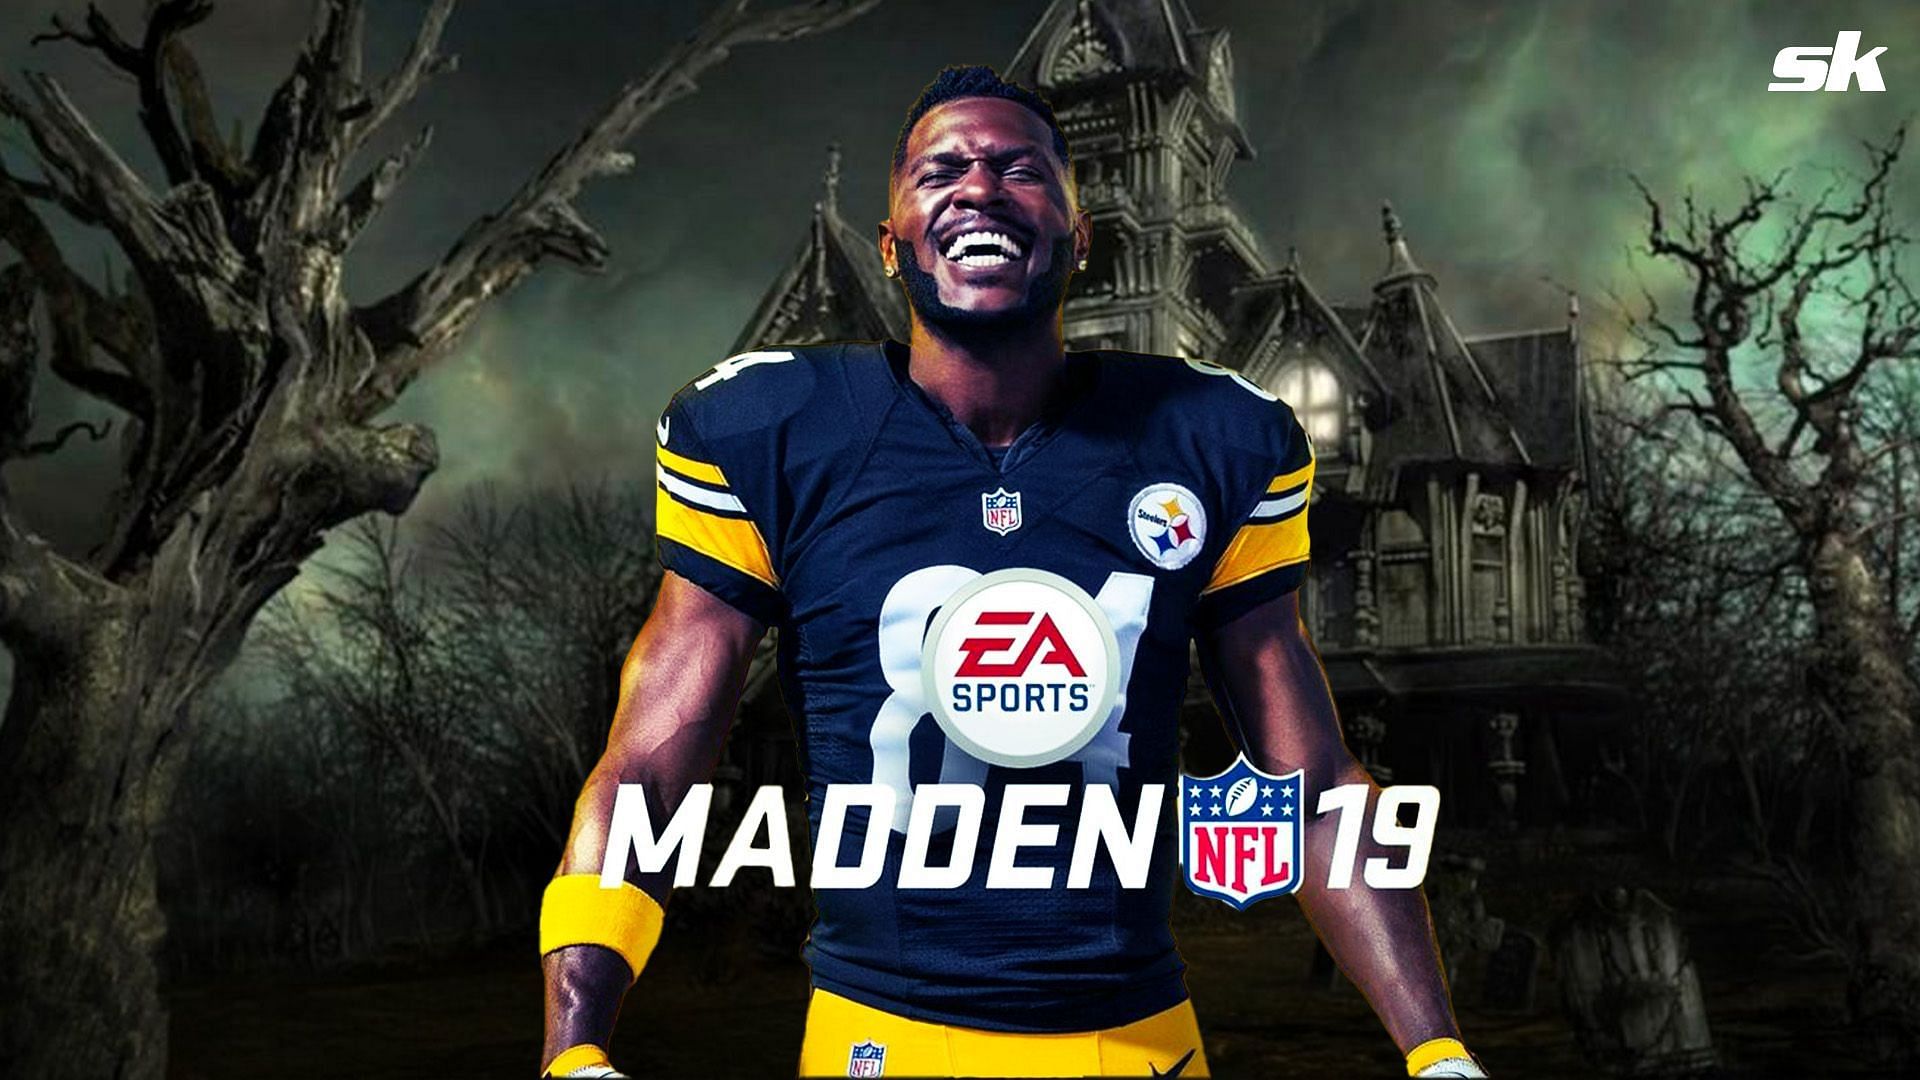 Antonio Brown, one of many Madden curse victims